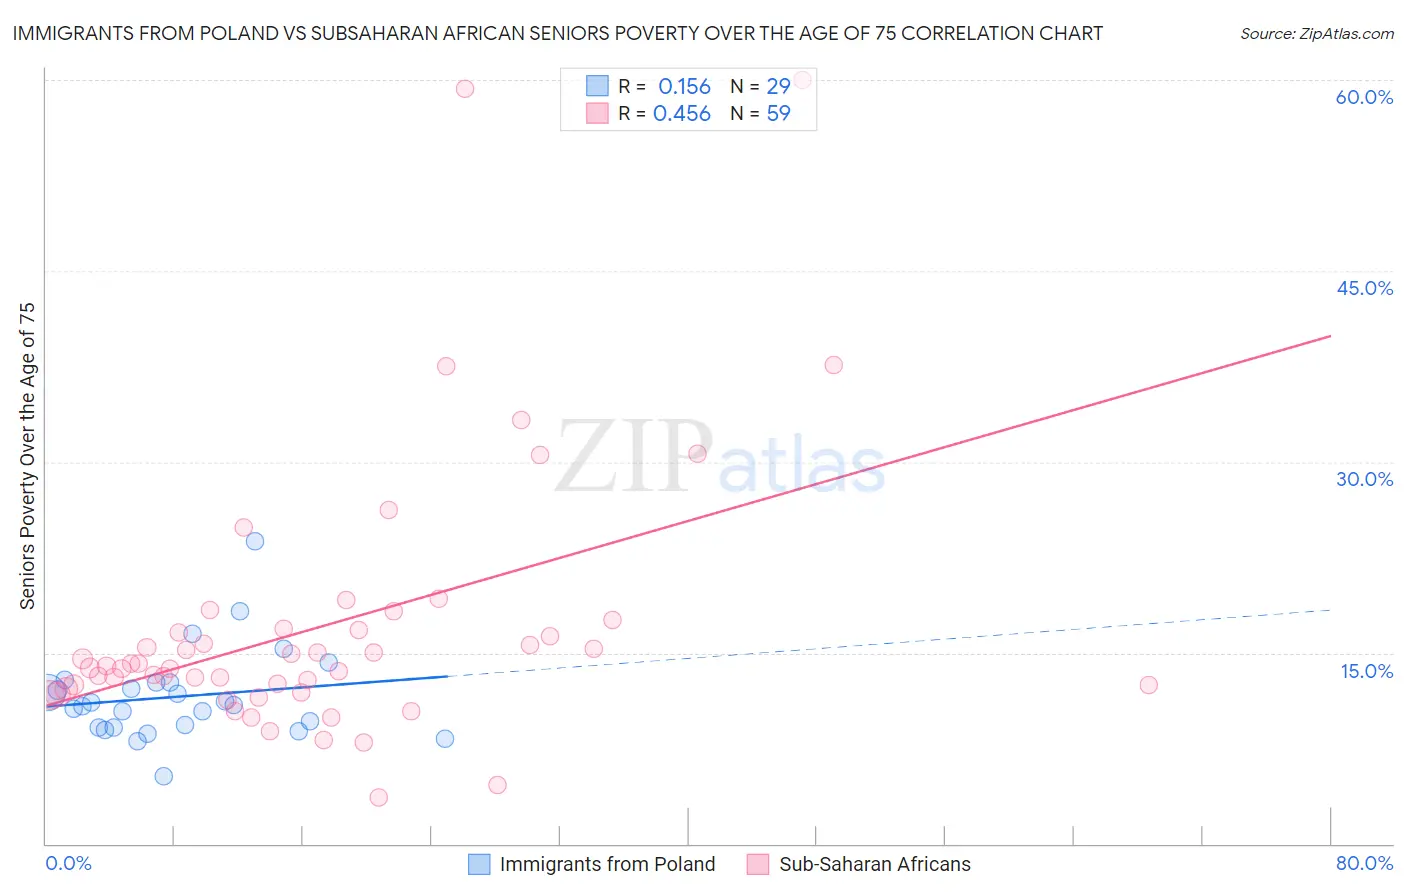 Immigrants from Poland vs Subsaharan African Seniors Poverty Over the Age of 75